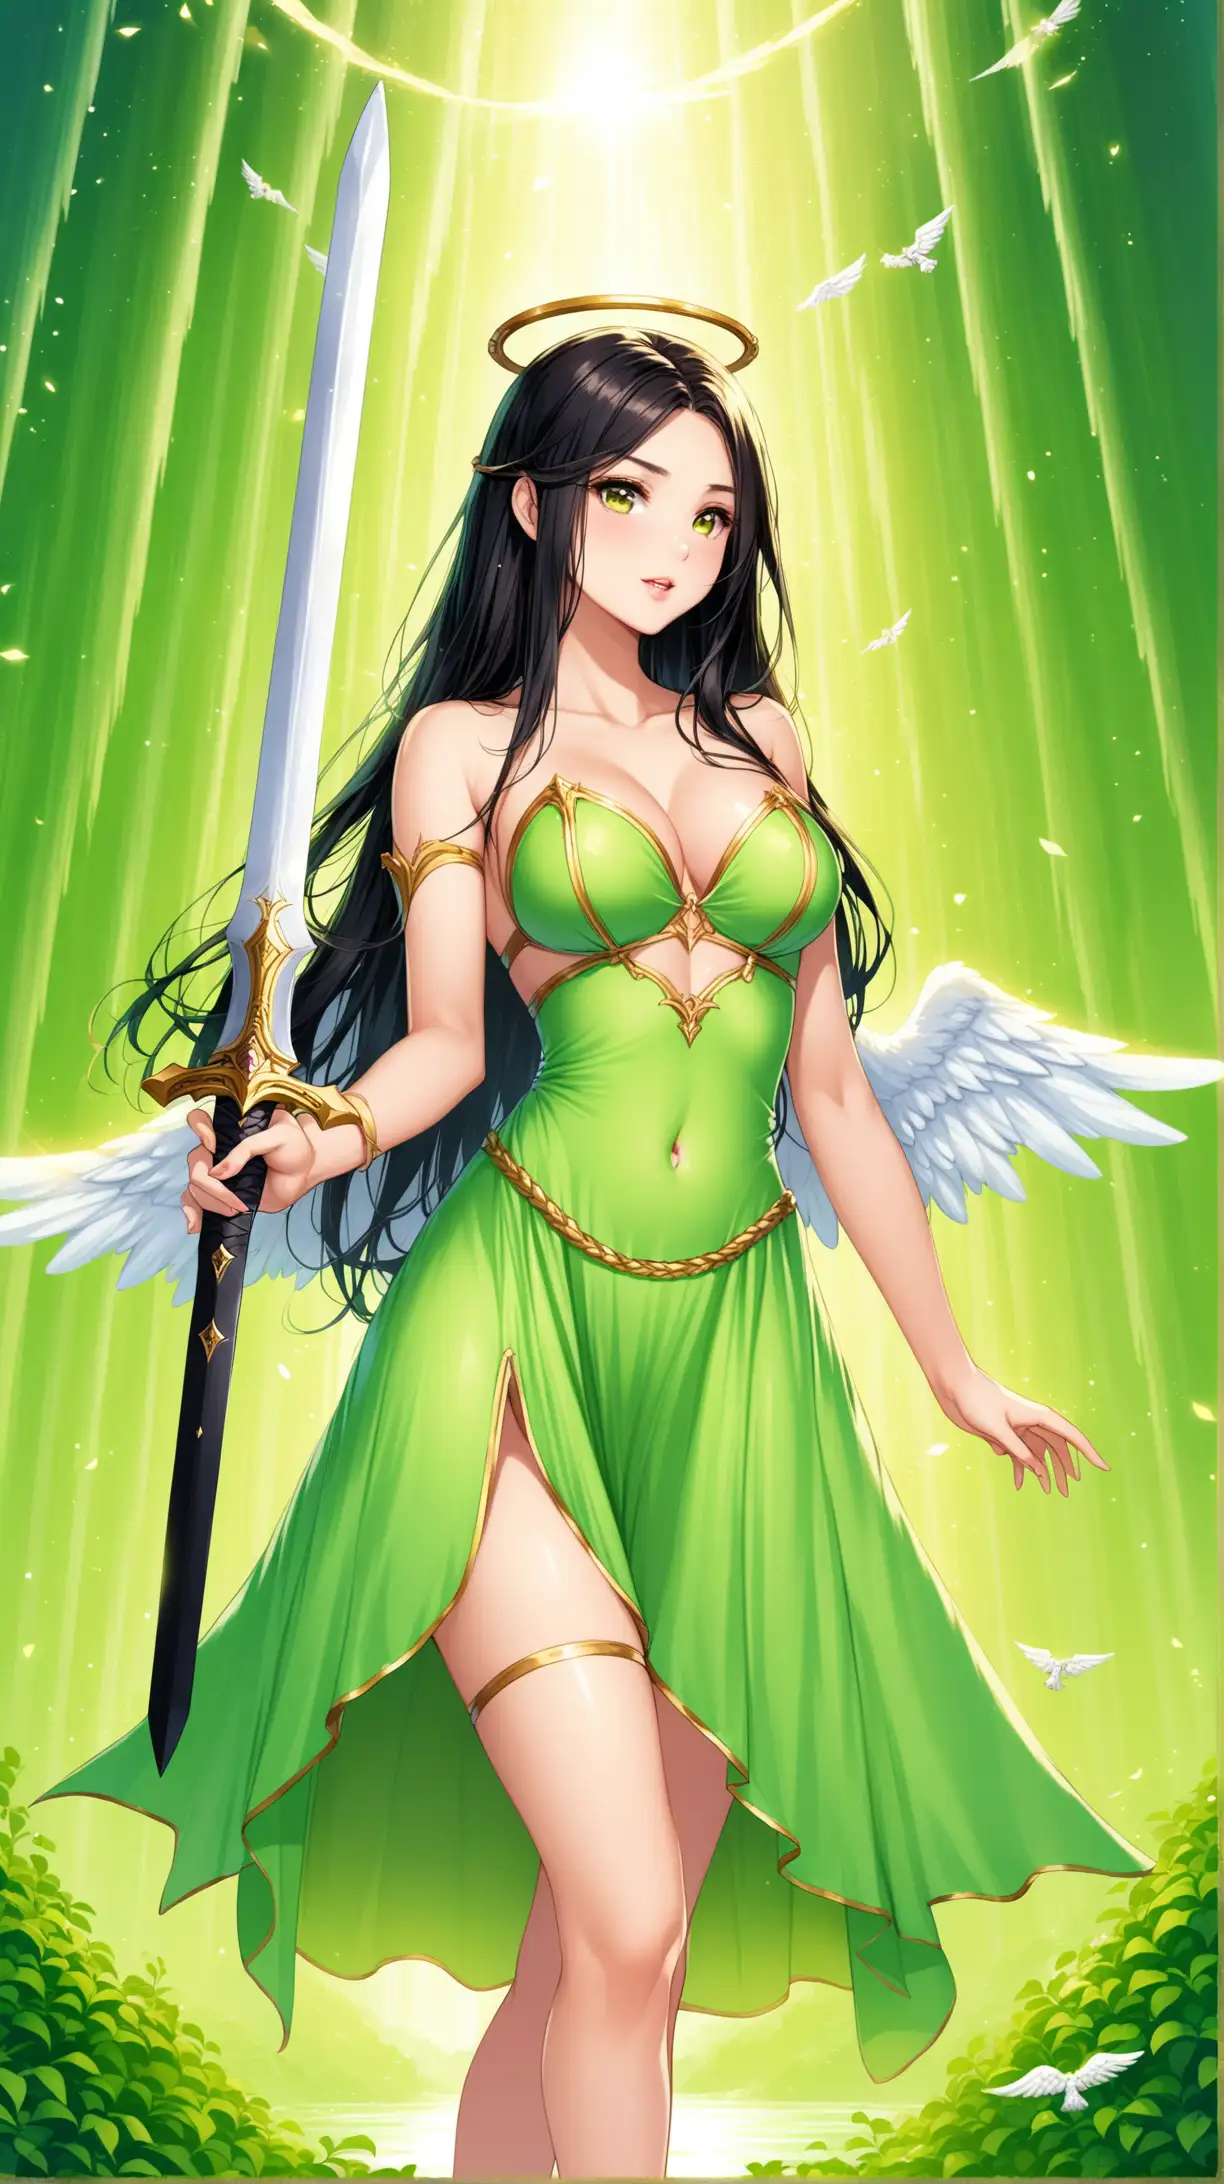 Seductive Angel Women with Swords in Fantasy Setting